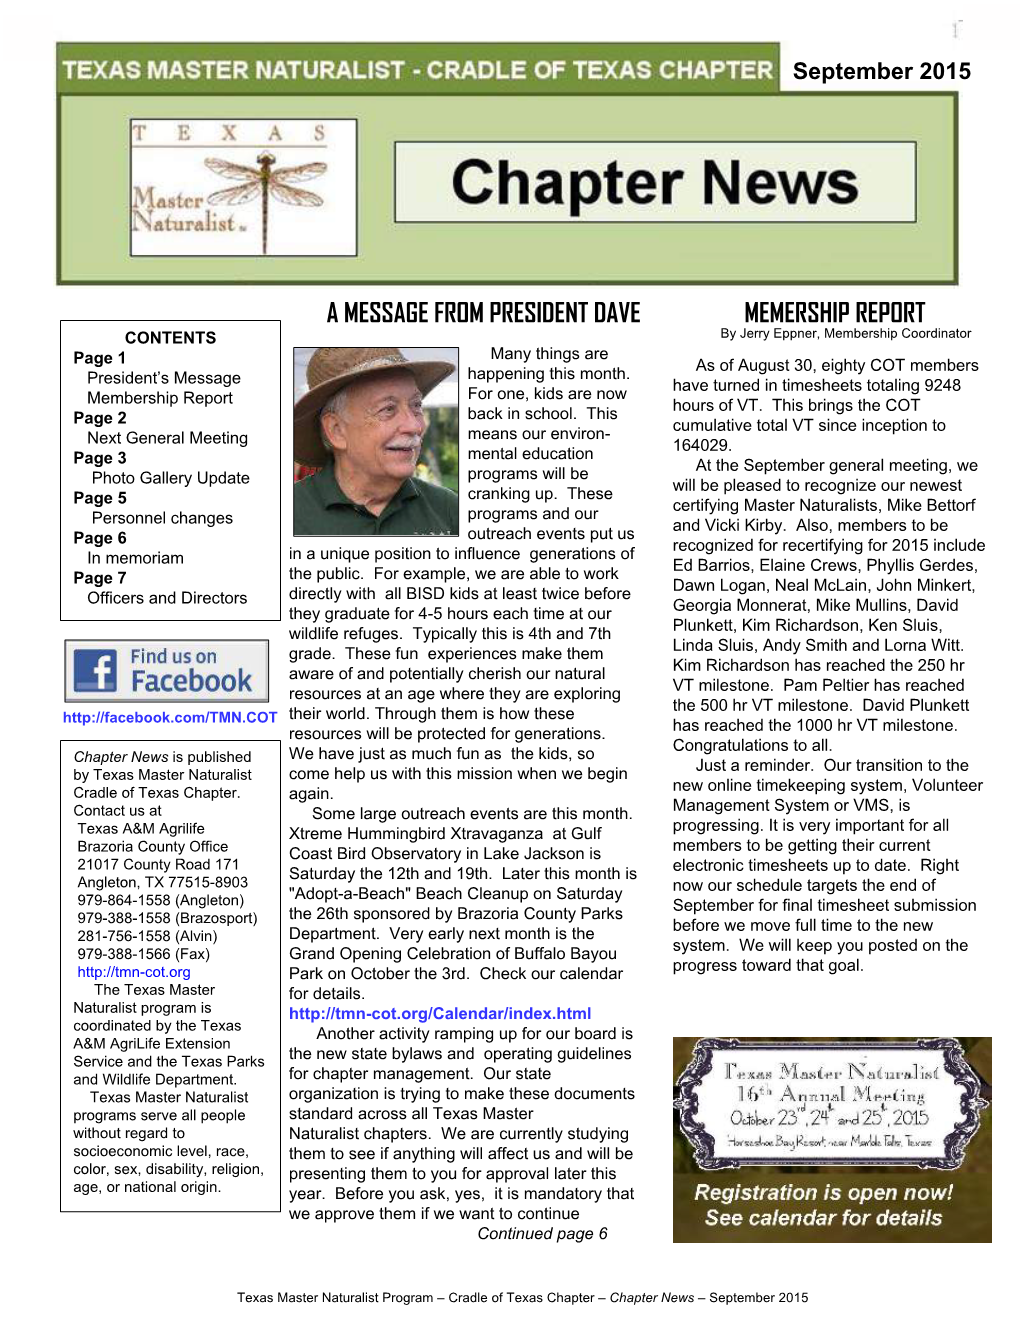 Chapter News Is Published We Have Just As Much Fun As the Kids, So Just a Reminder